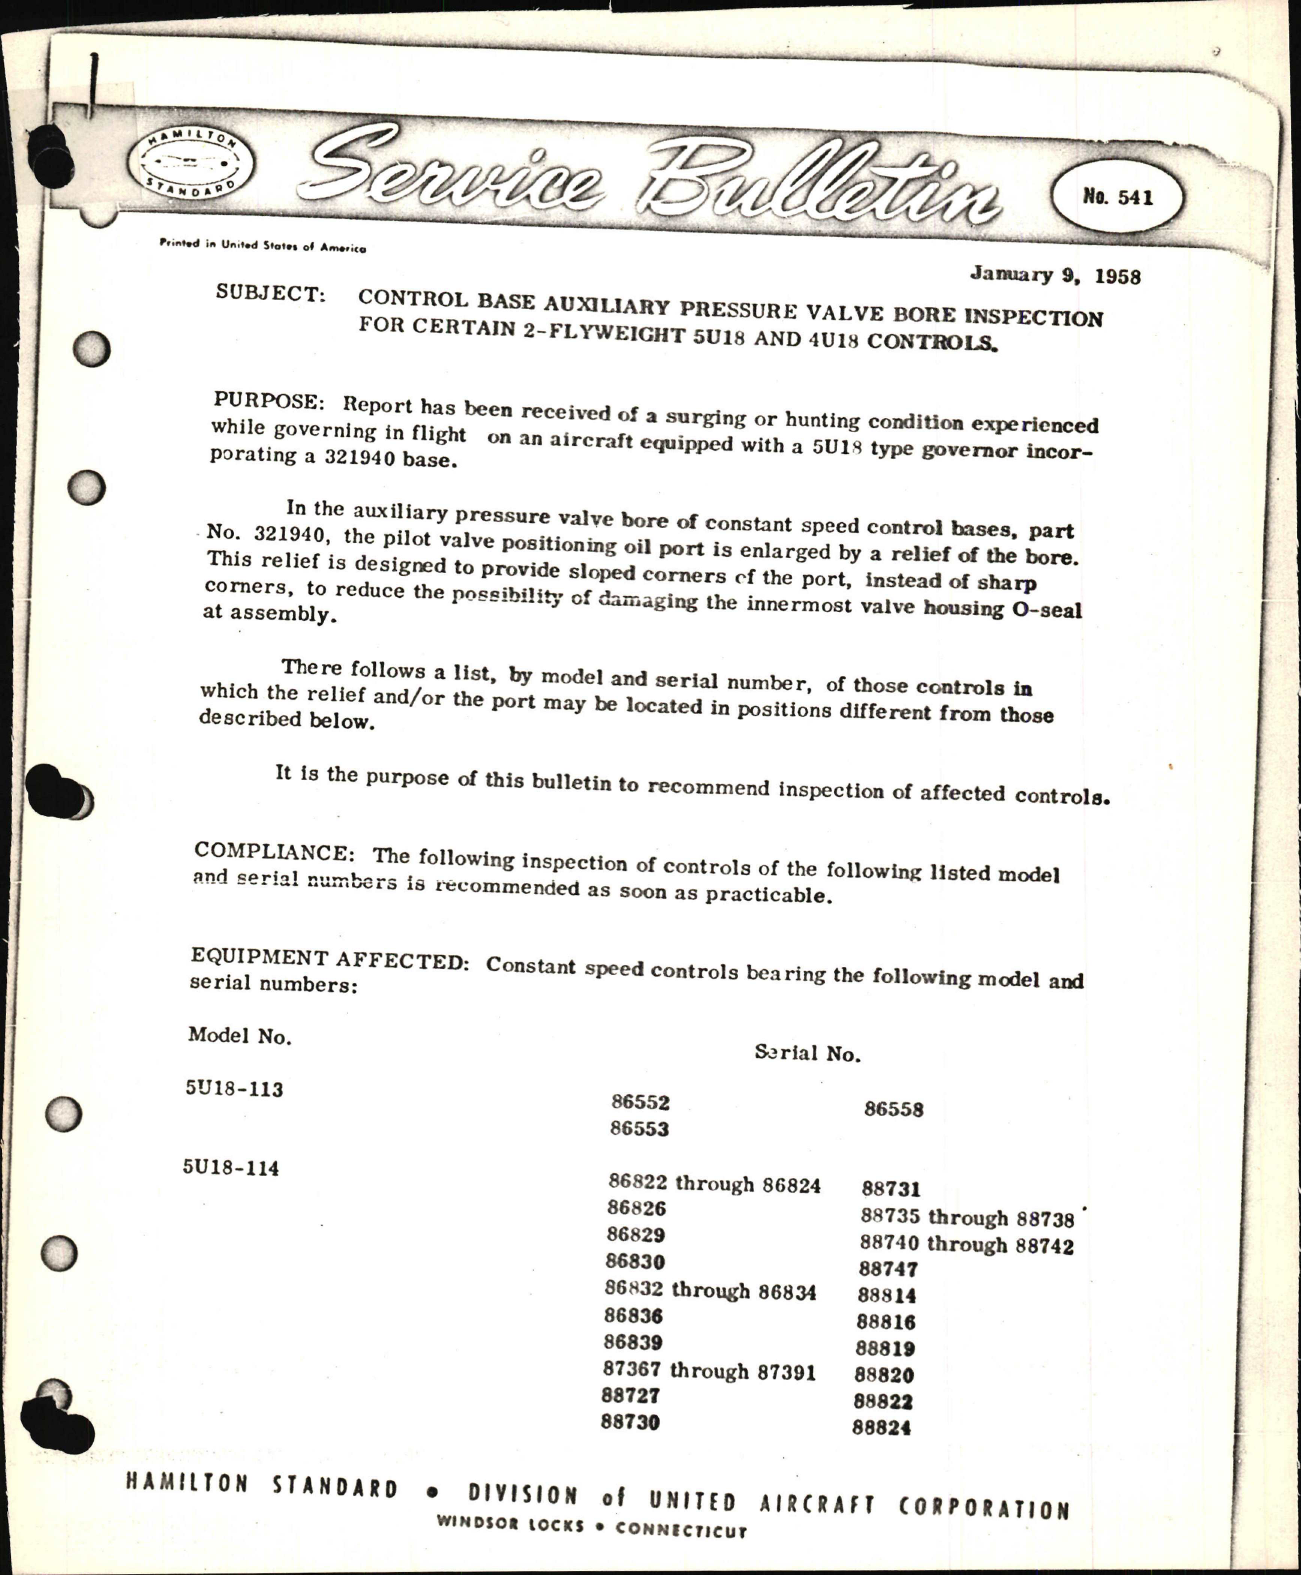 Sample page 1 from AirCorps Library document: Control Base Auxiliary Pressure Valve Bore Inspection for Certain 2-Flyweight 5U18 and 4U18 Controls